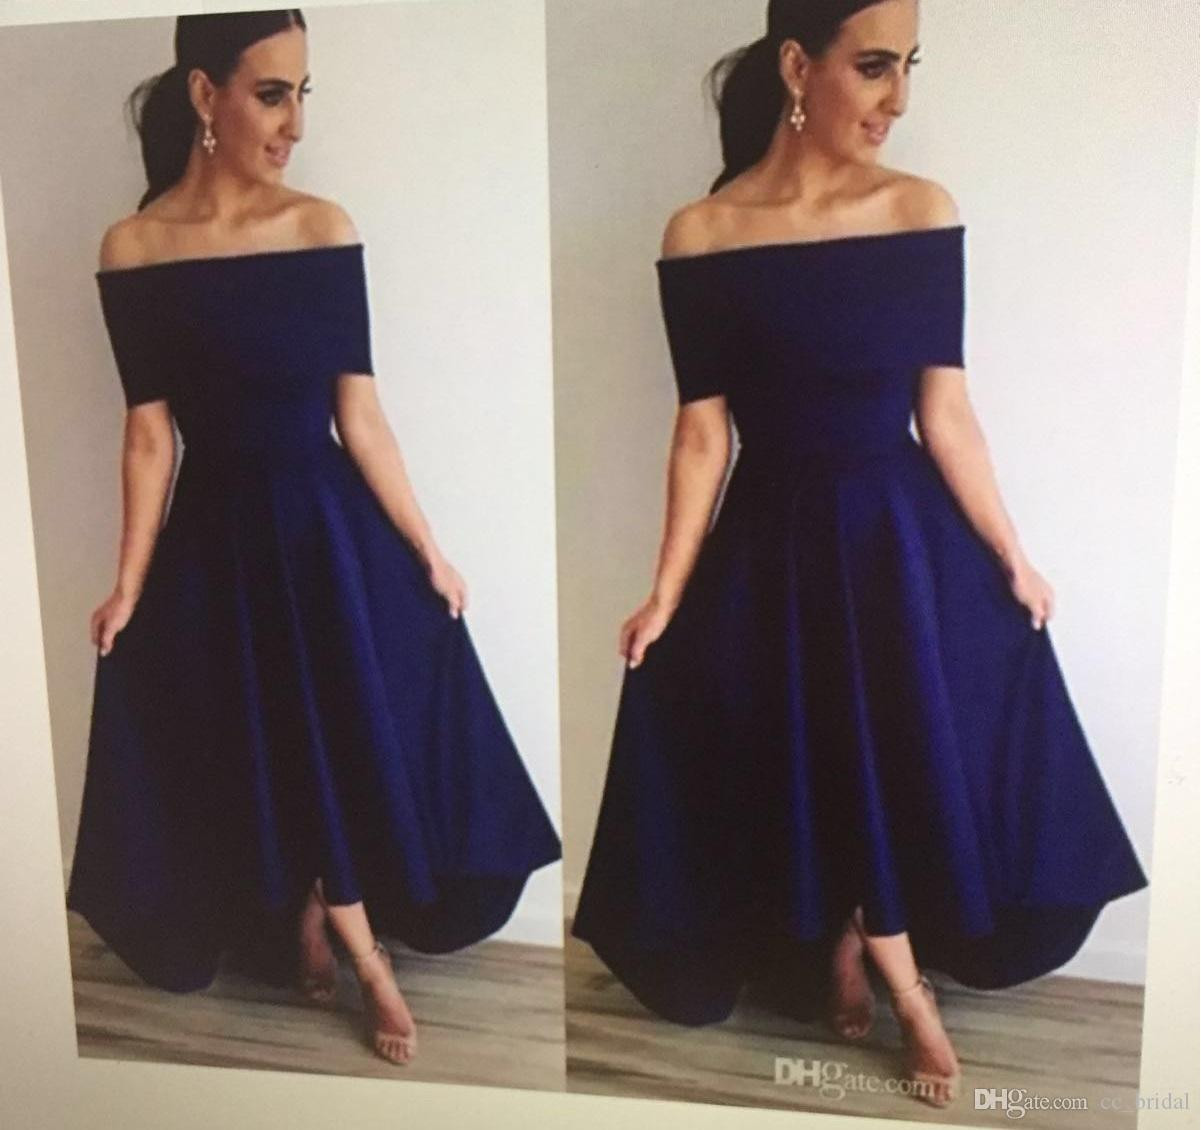 Navy Blue Dresses For Wedding
 Strapless Navy Blue Bridesmaid Dresses 2017 With y f